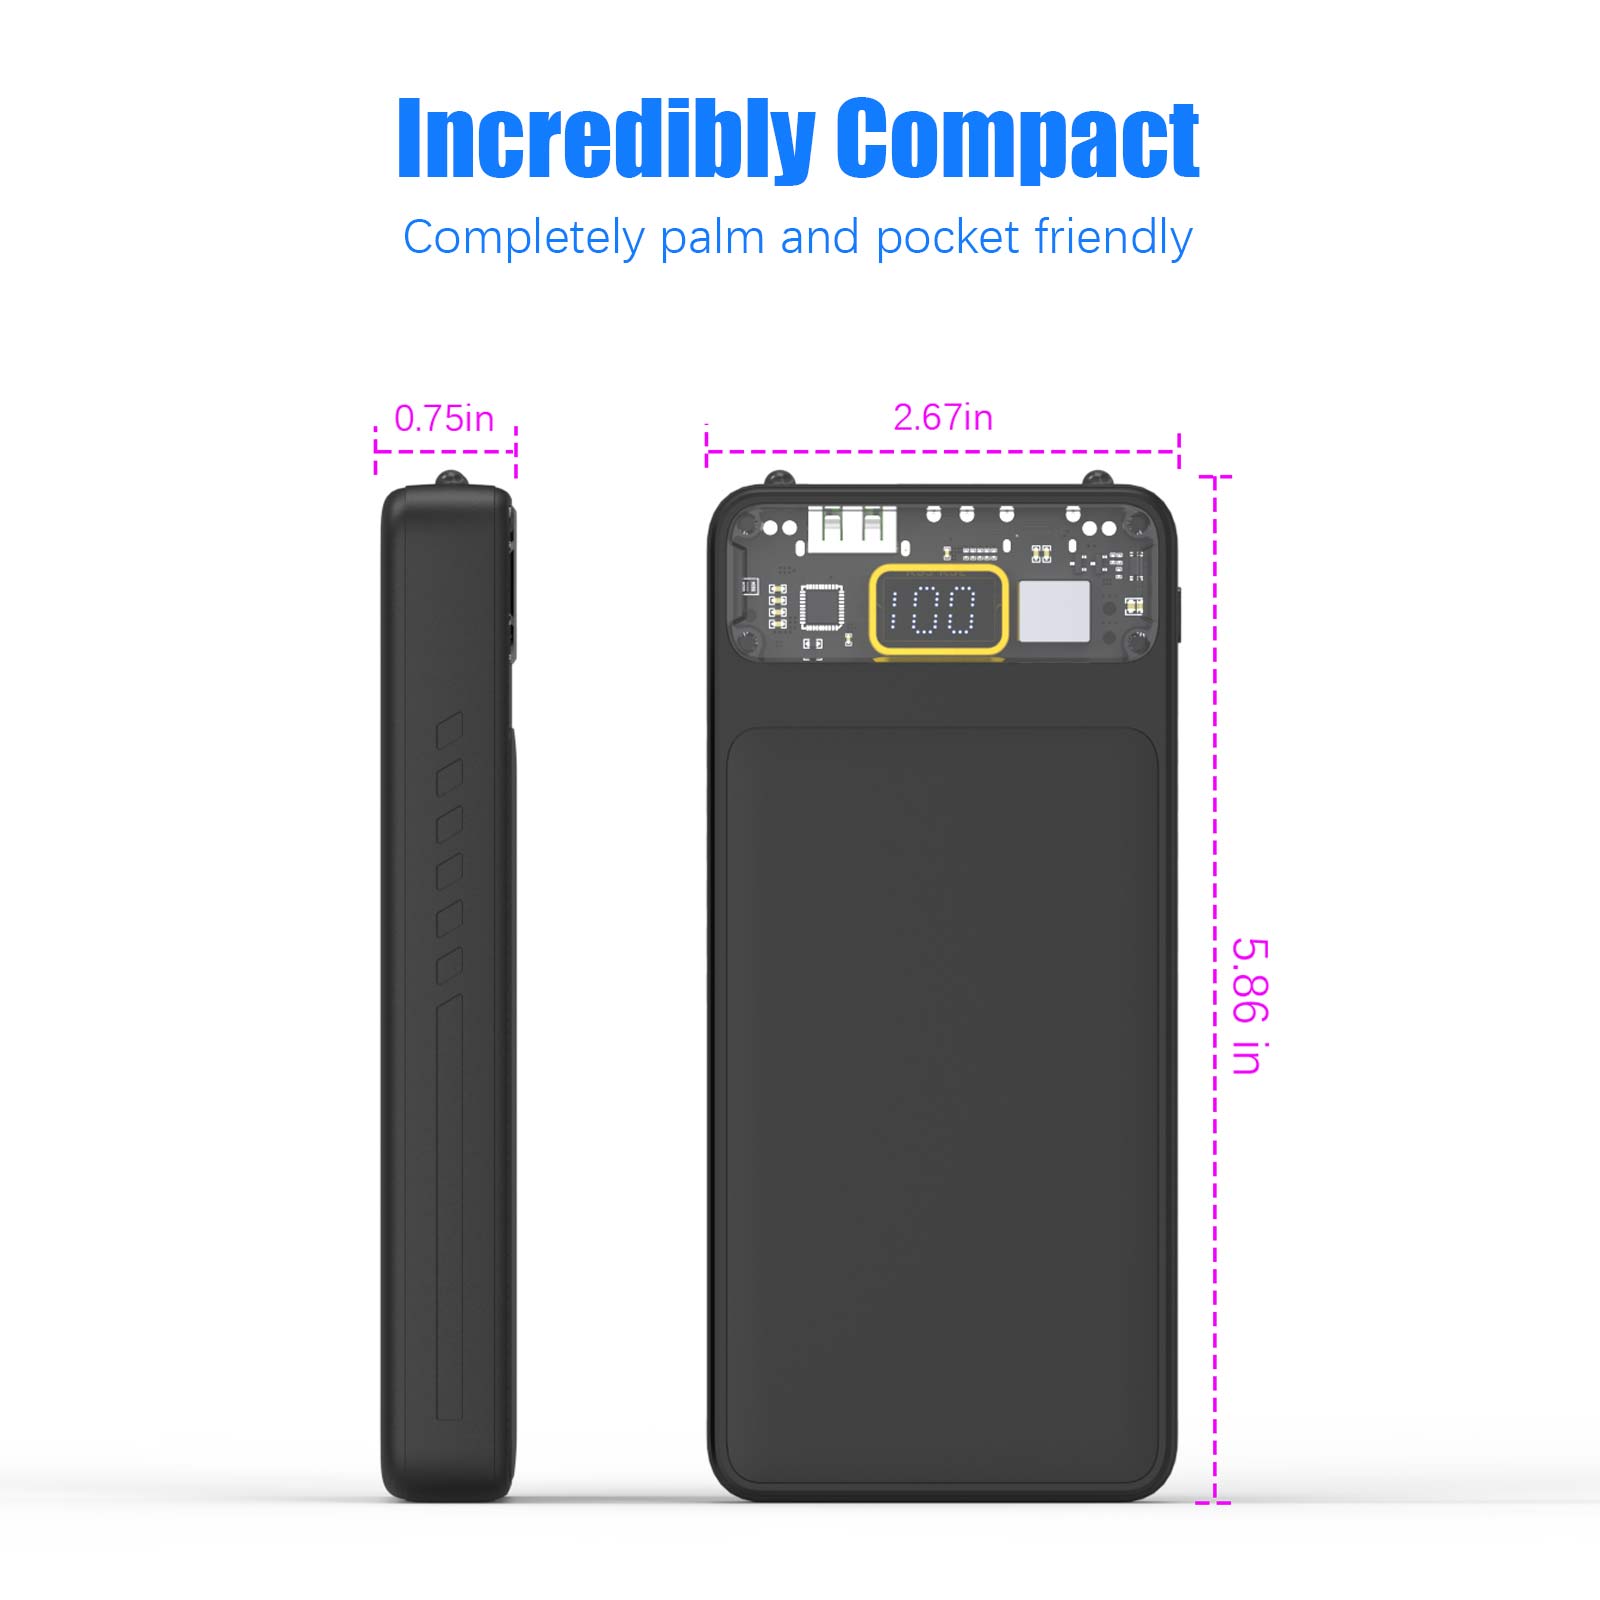 Flashlight Power Bank, Powerbank, 10000mAh Portable Charger with Built-in Cables, USB C External Battery Pack, suitable for smartphones, tablets, cameras etc.